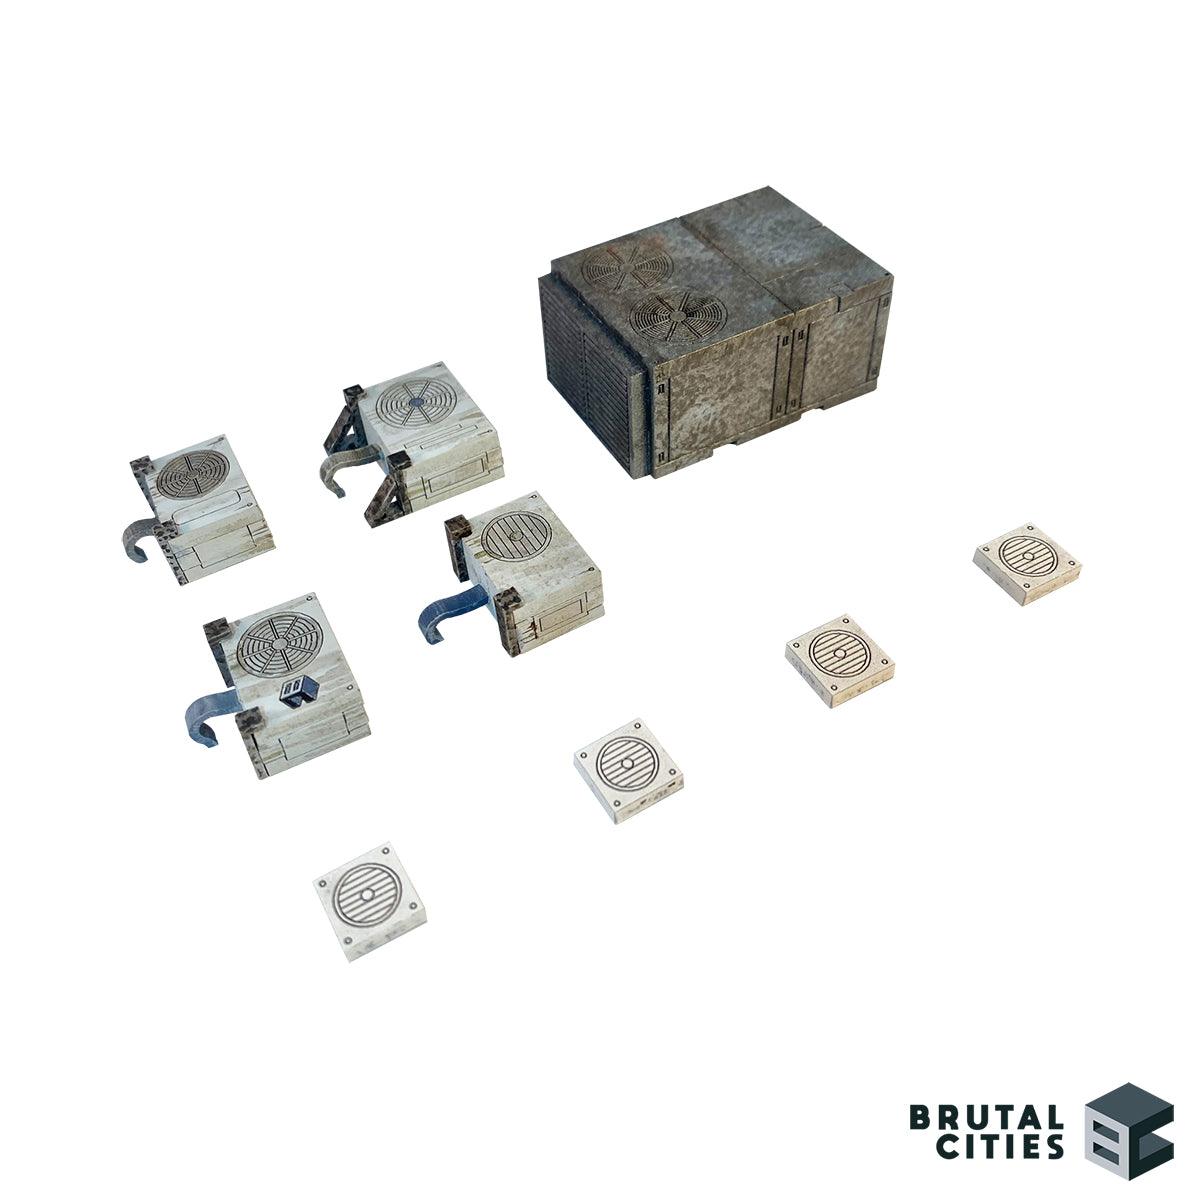 Air conditioning units for miniature scenery. 